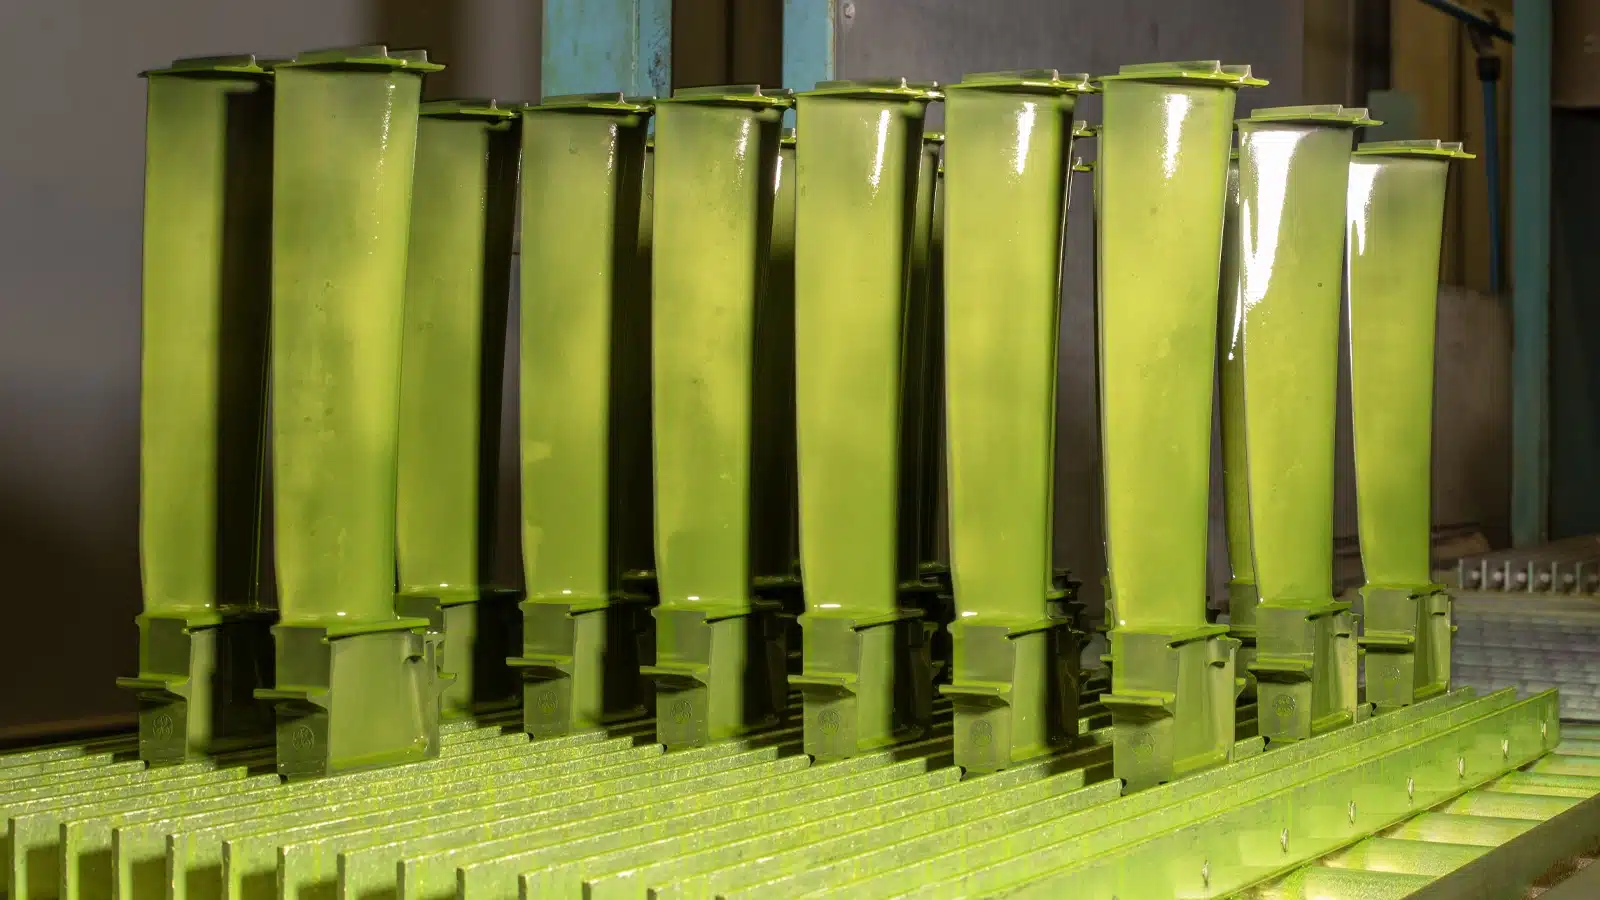 Turbine Blades Being Tested With Floresencent Penetrant Dye